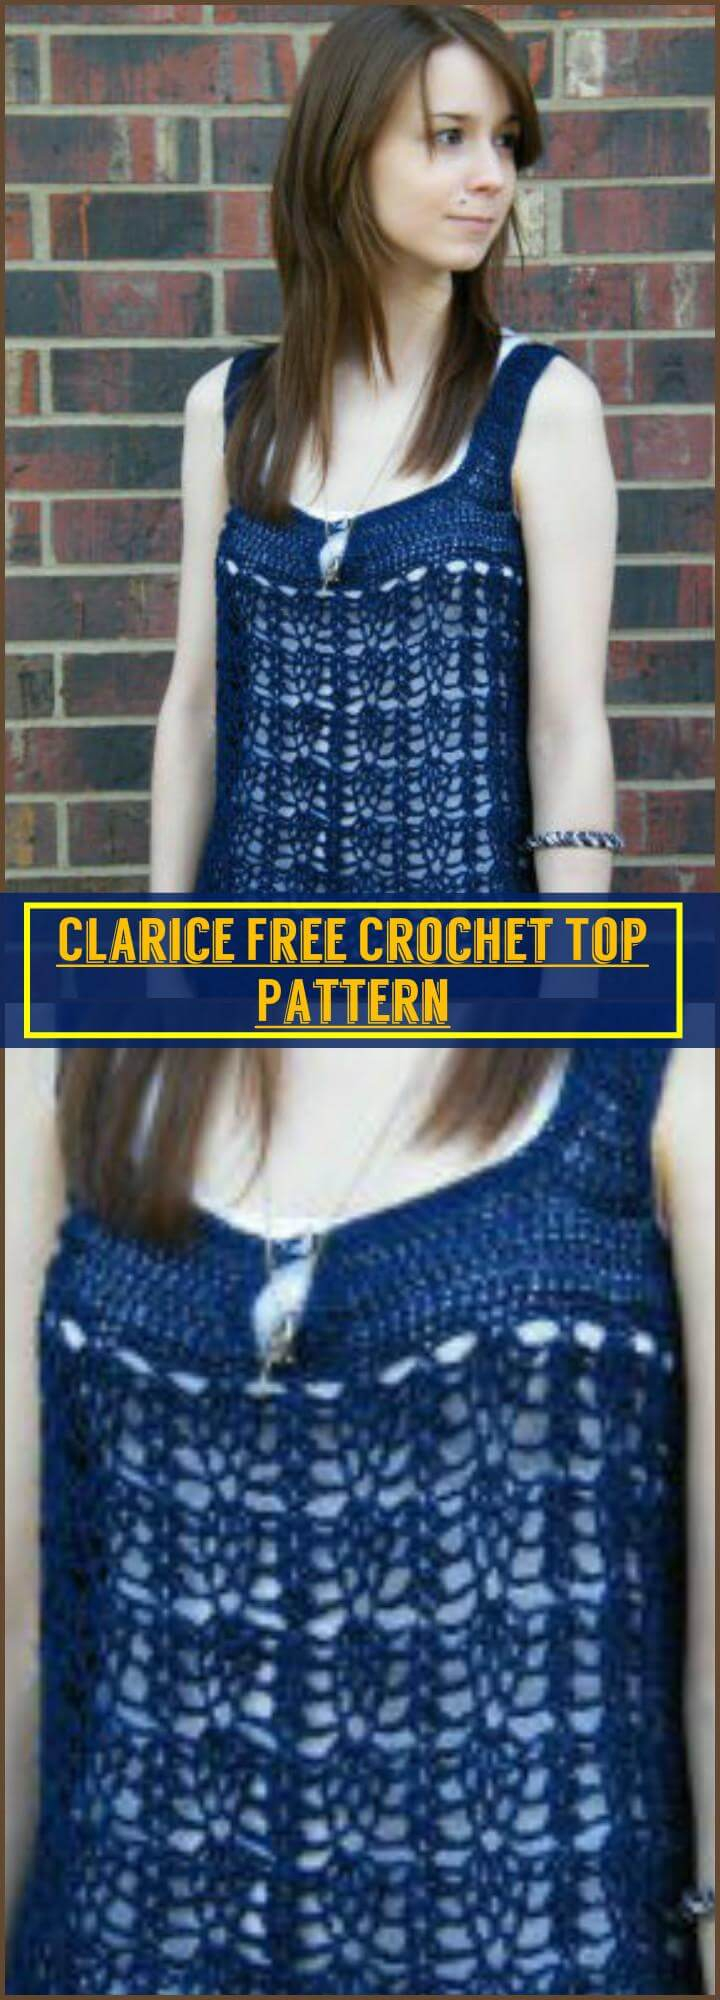 Crochet Clothing Patterns 110 Free Crochet Patterns For Summer And Spring Diy Crafts